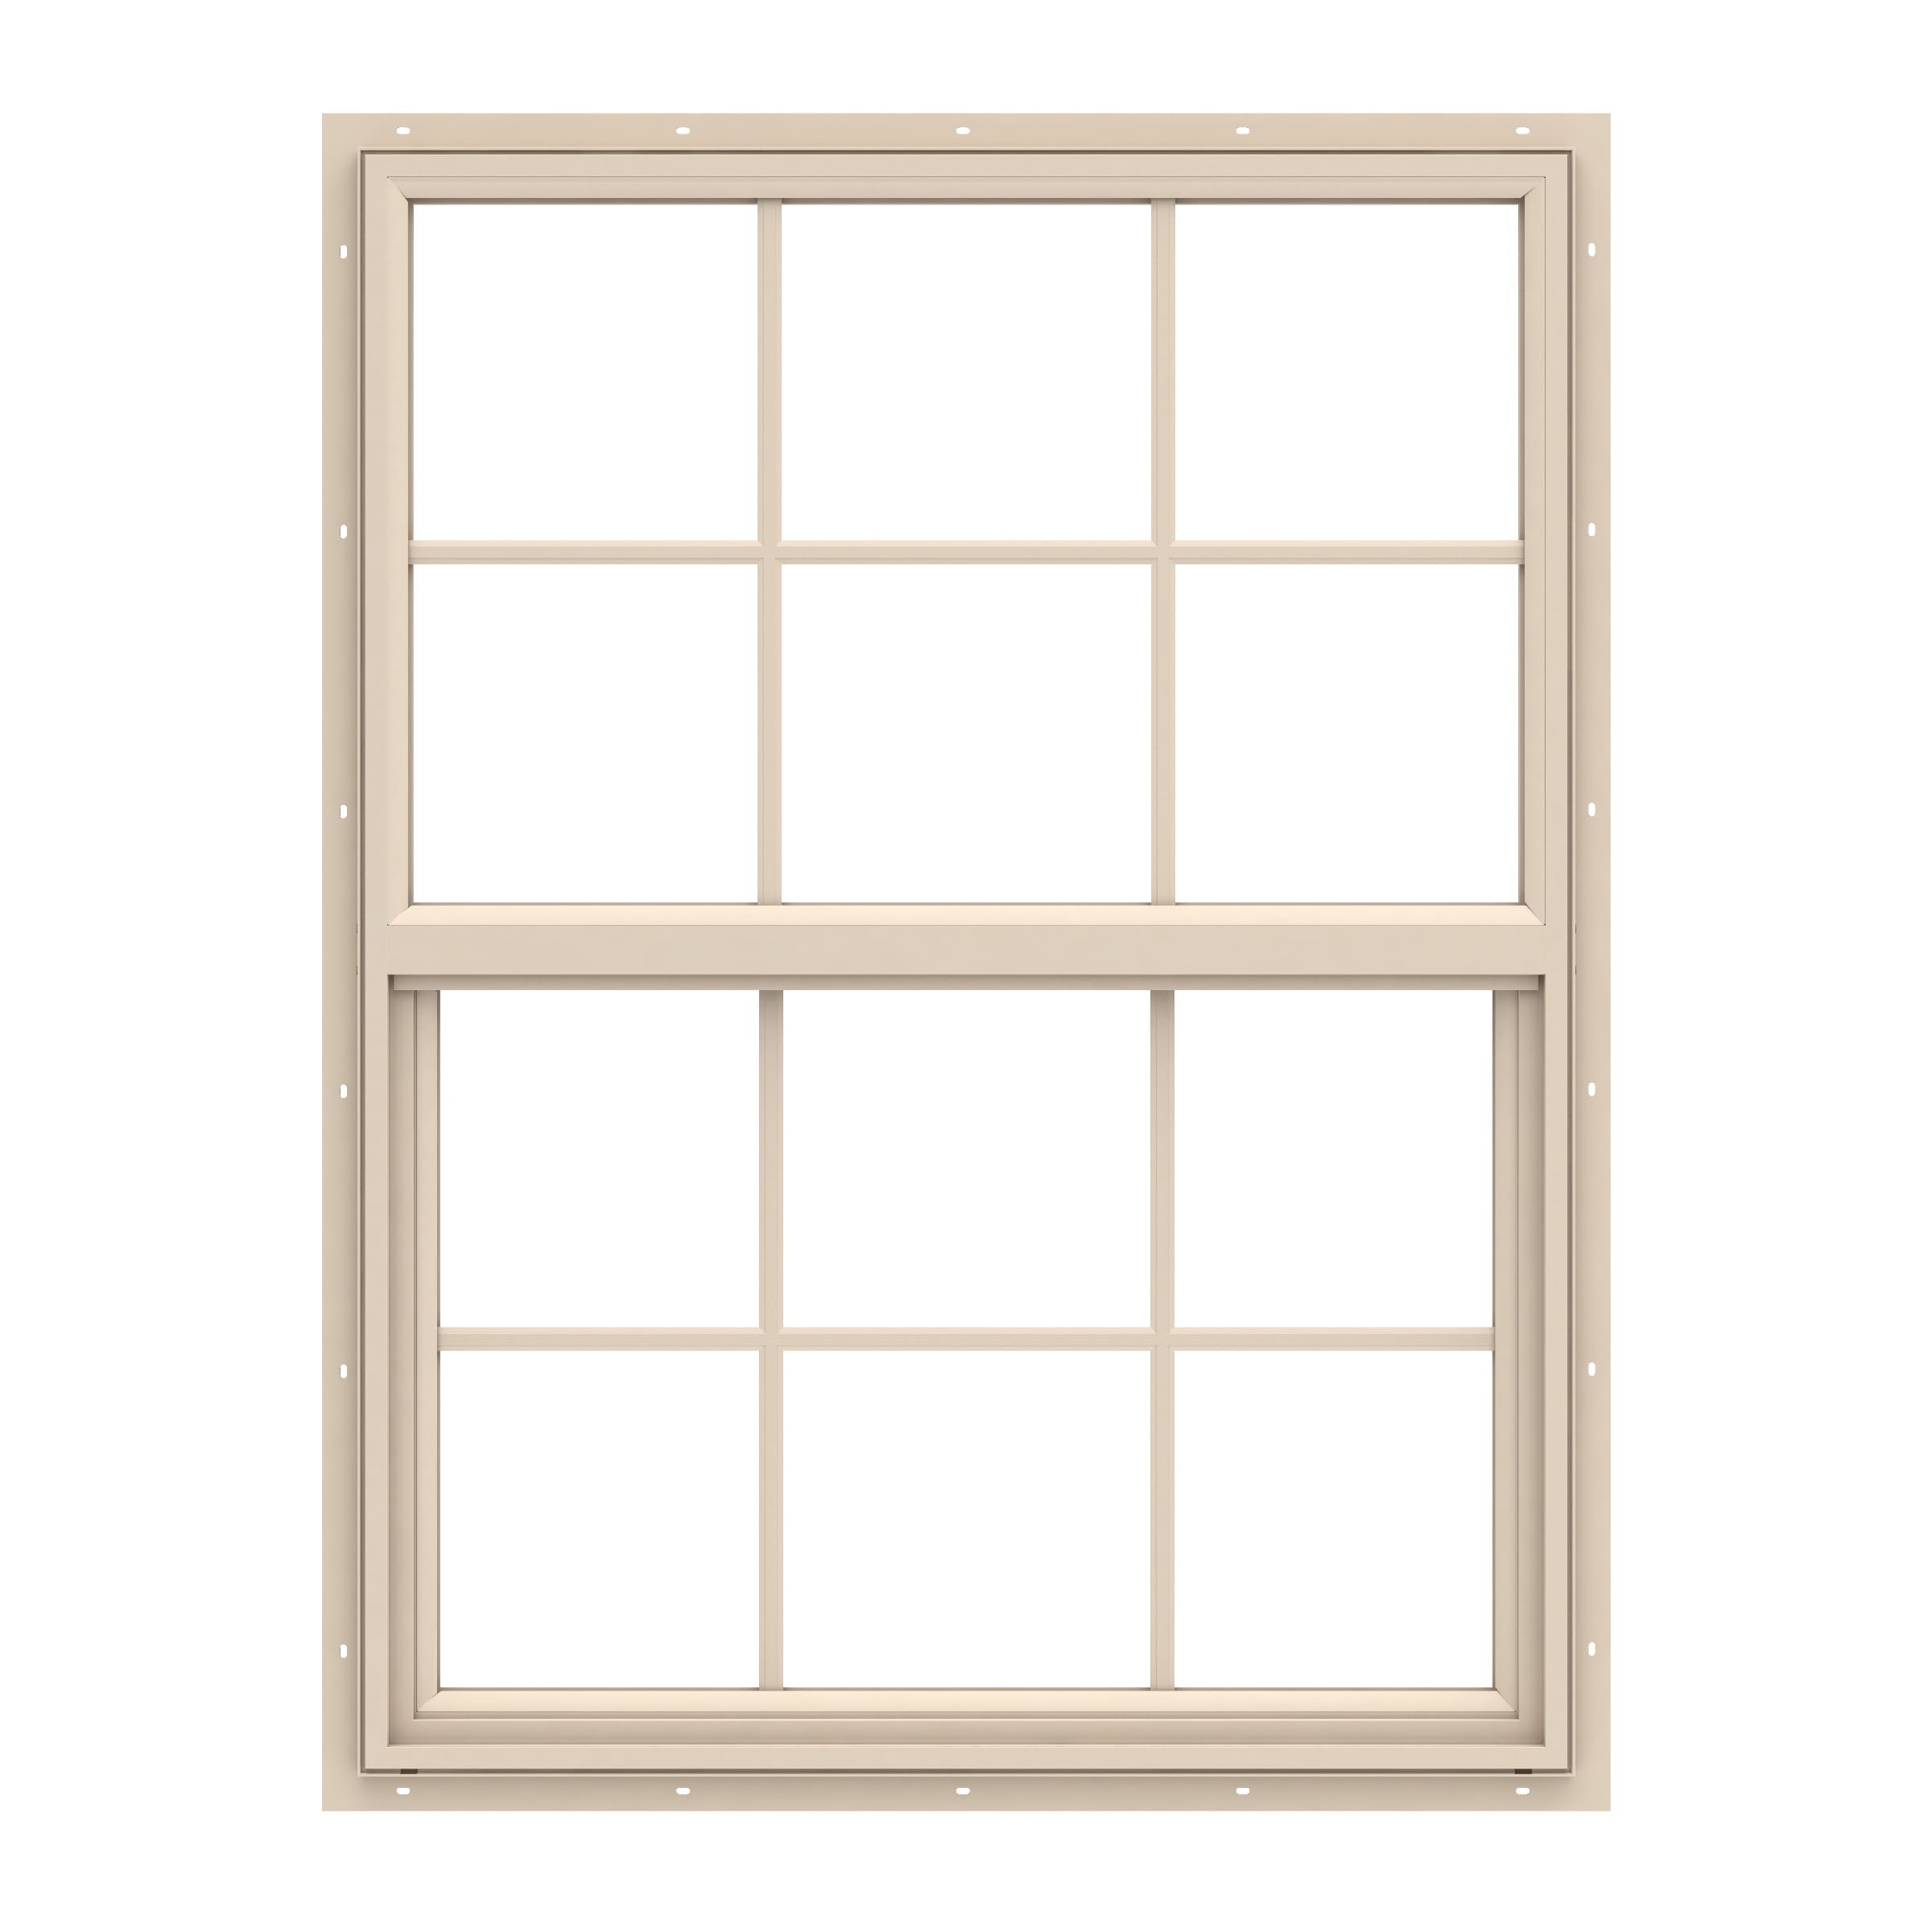 Pella 150 Series New Construction 23.5-in x 35.5-in x 2.6875-in Jamb Almond Vinyl Low-e Argon Single Hung Window with Grids Half Screen Included -  1000010921